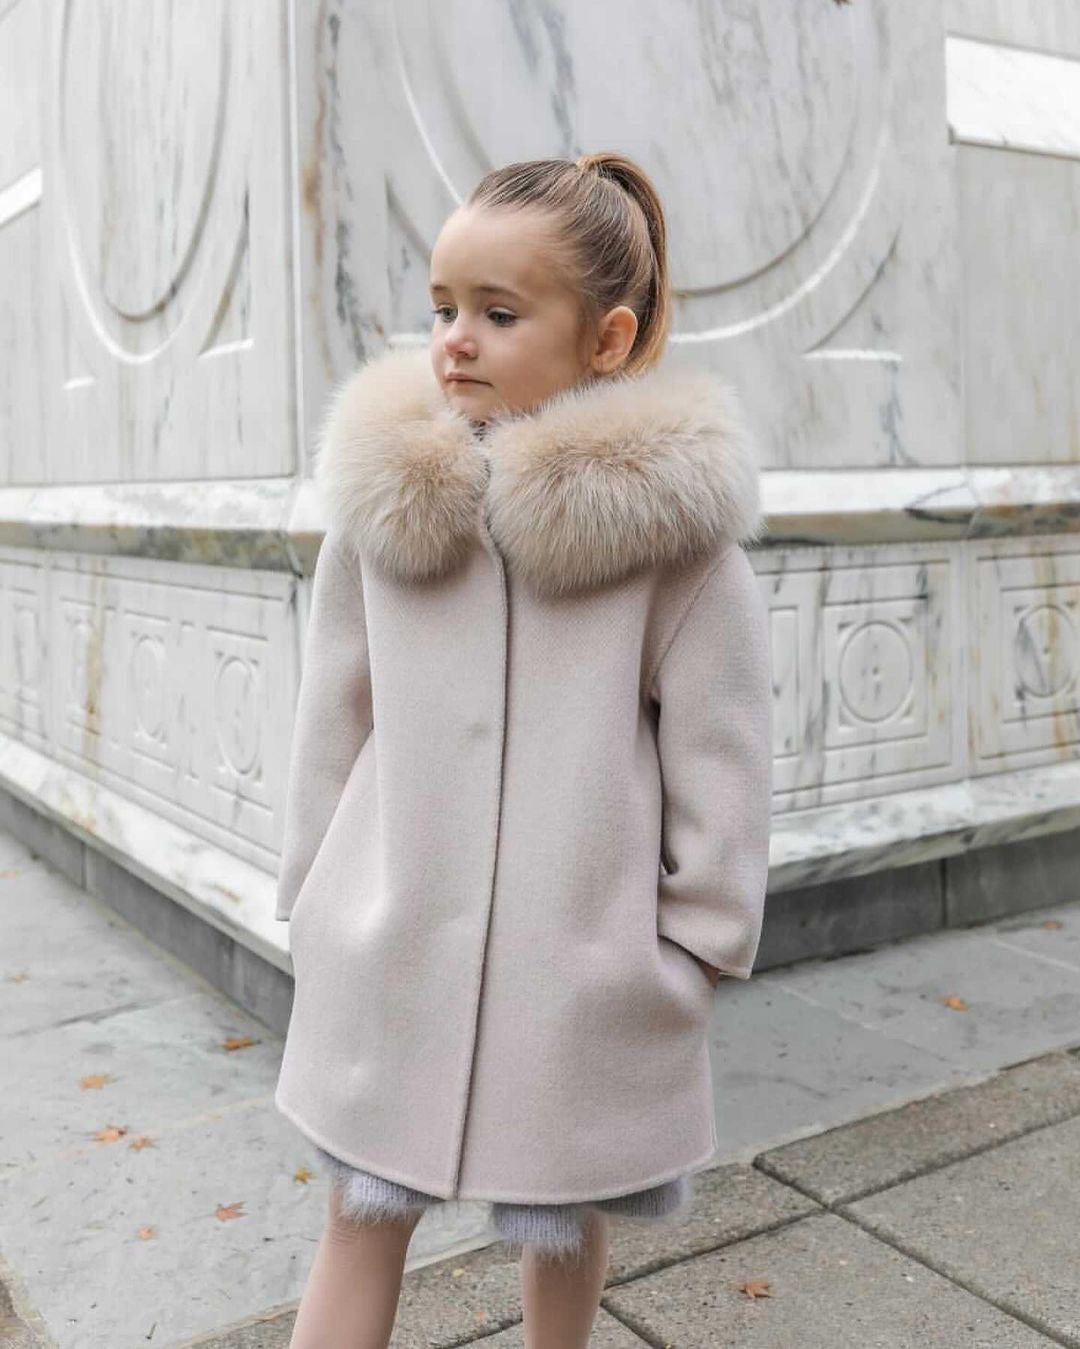 A kid wearing a beige cashmere and fur coat designed by MVFURS.